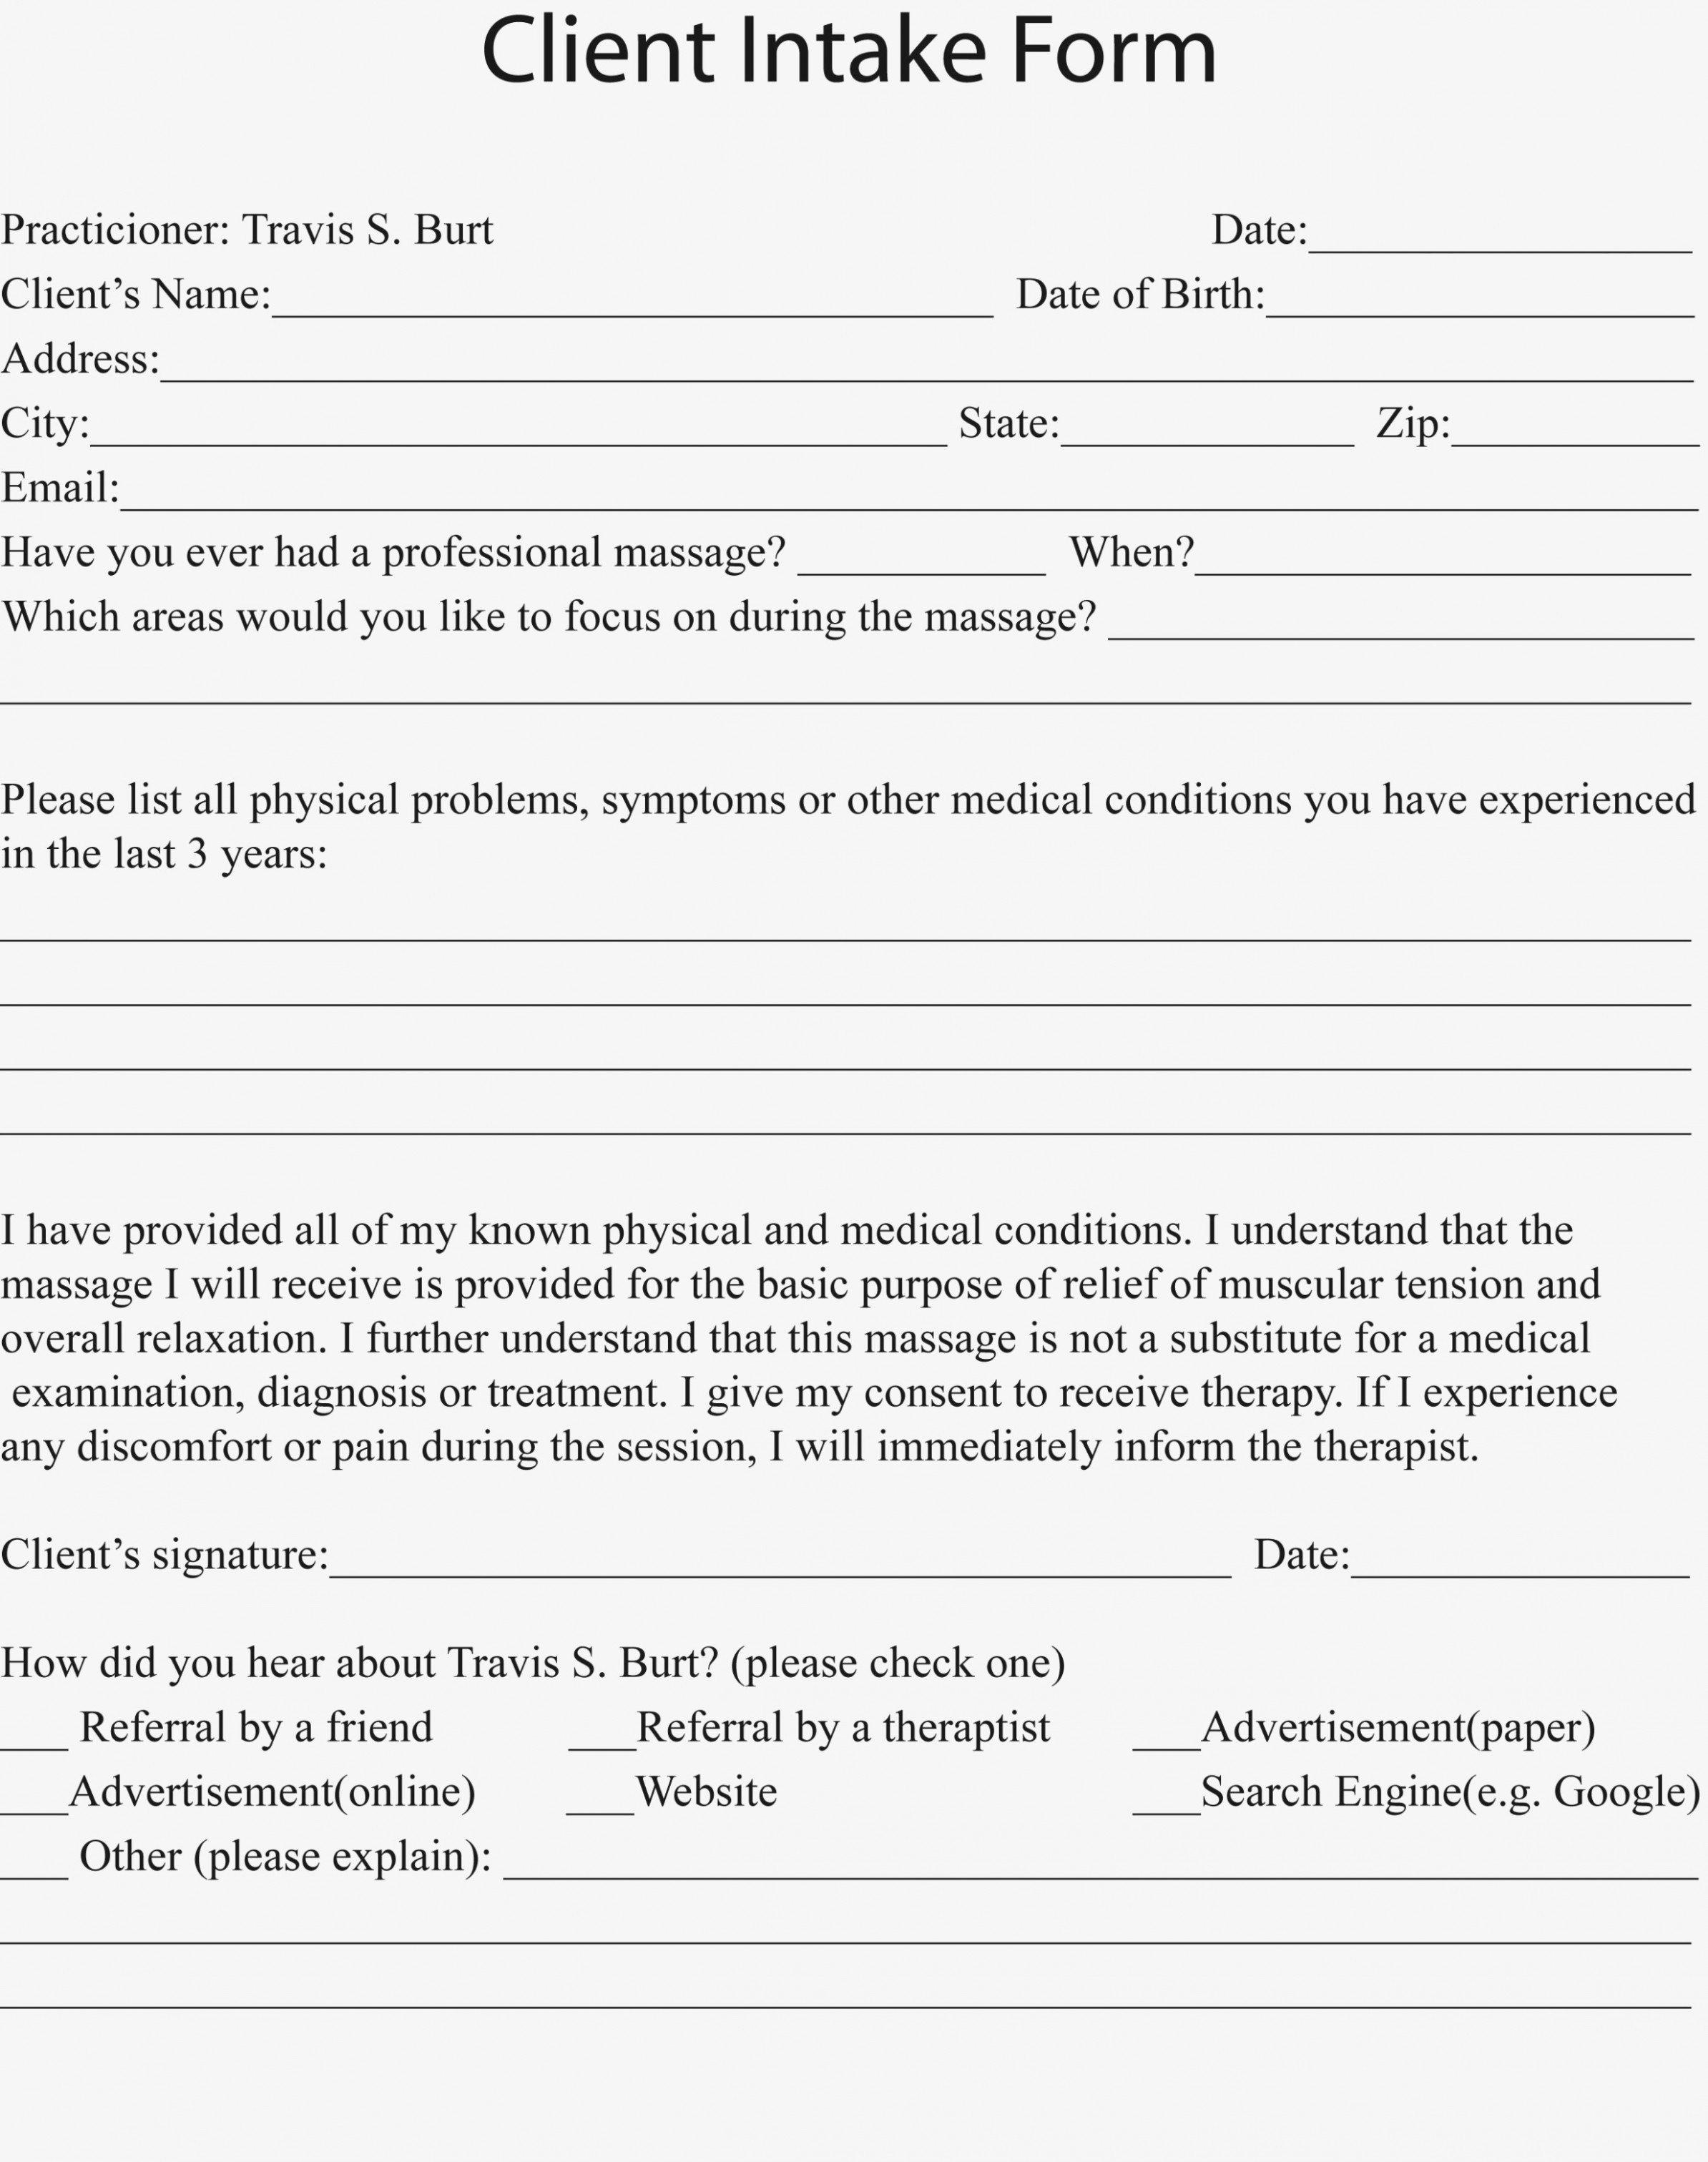 Counseling Intake form Template Fresh How to Leave Client Intake